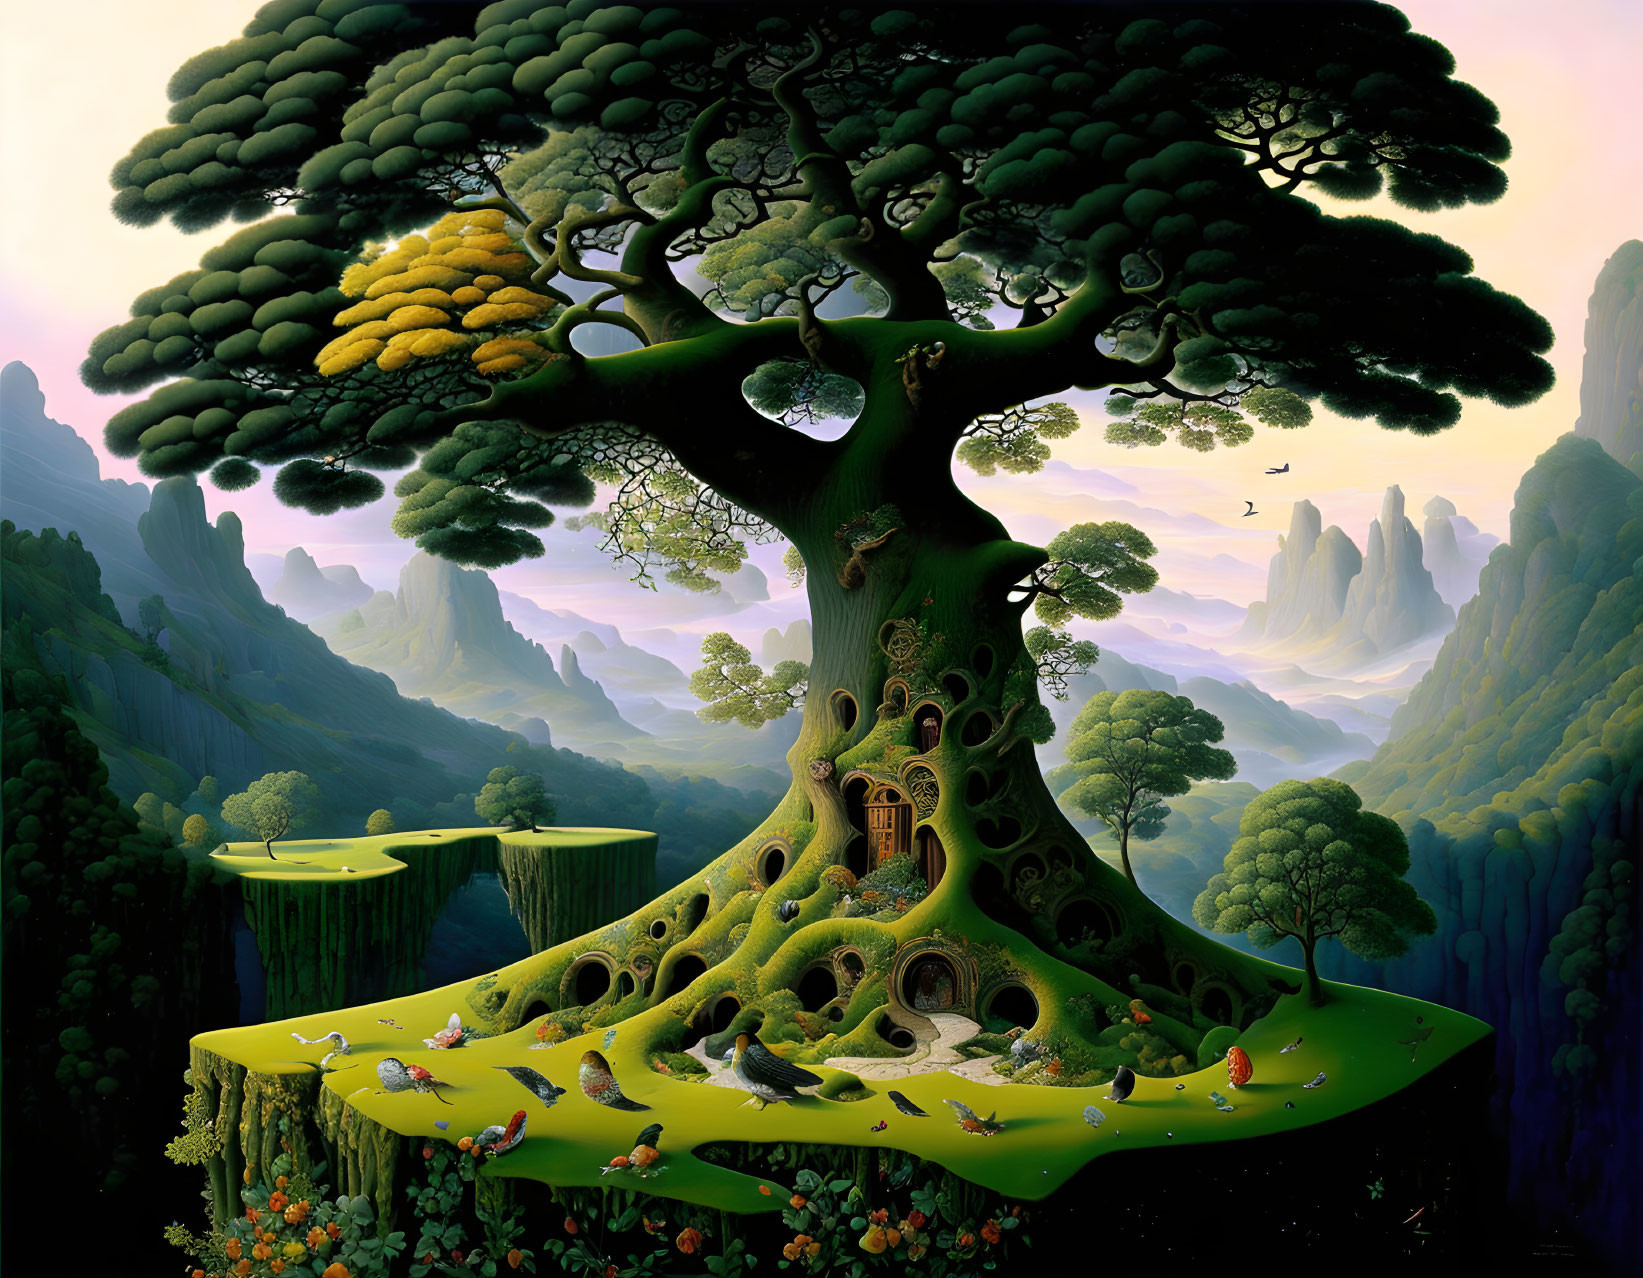 Whimsical painting of giant tree with door and floating islands